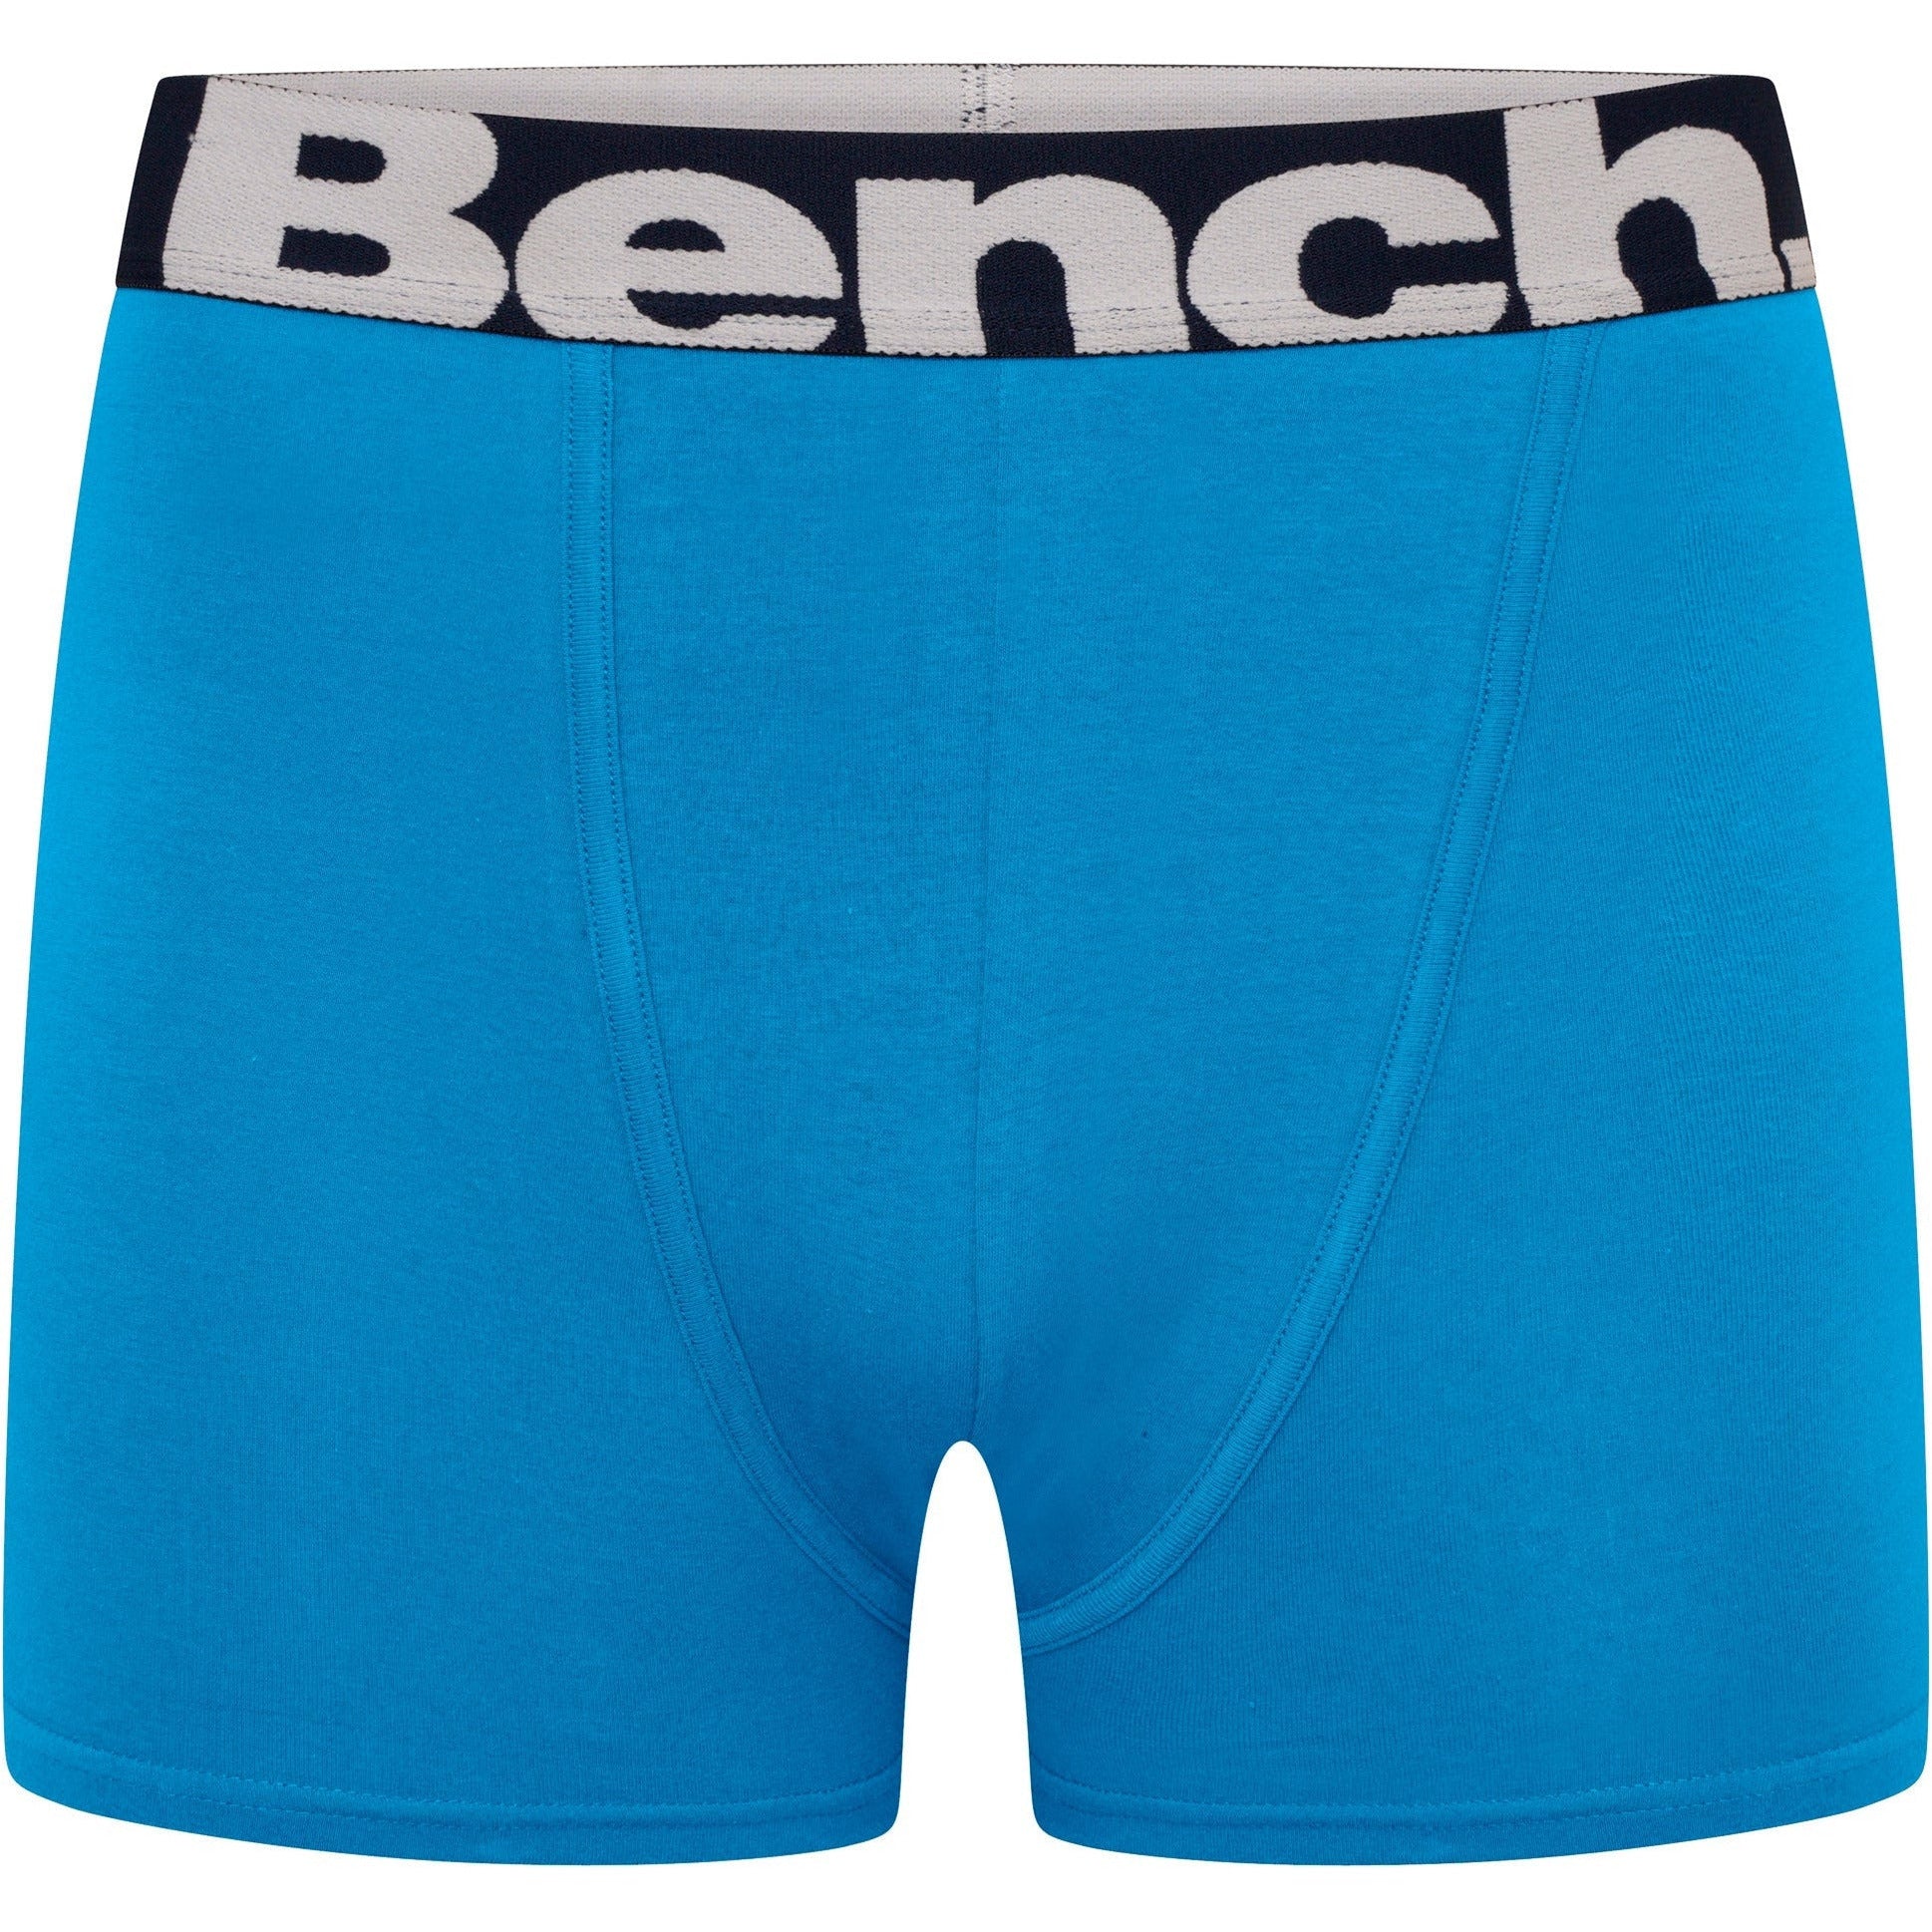 Mens 'KEATING' 7 Pack Boxers - ASSORTED - Shop at www.Bench.co.uk #LoveMyHood